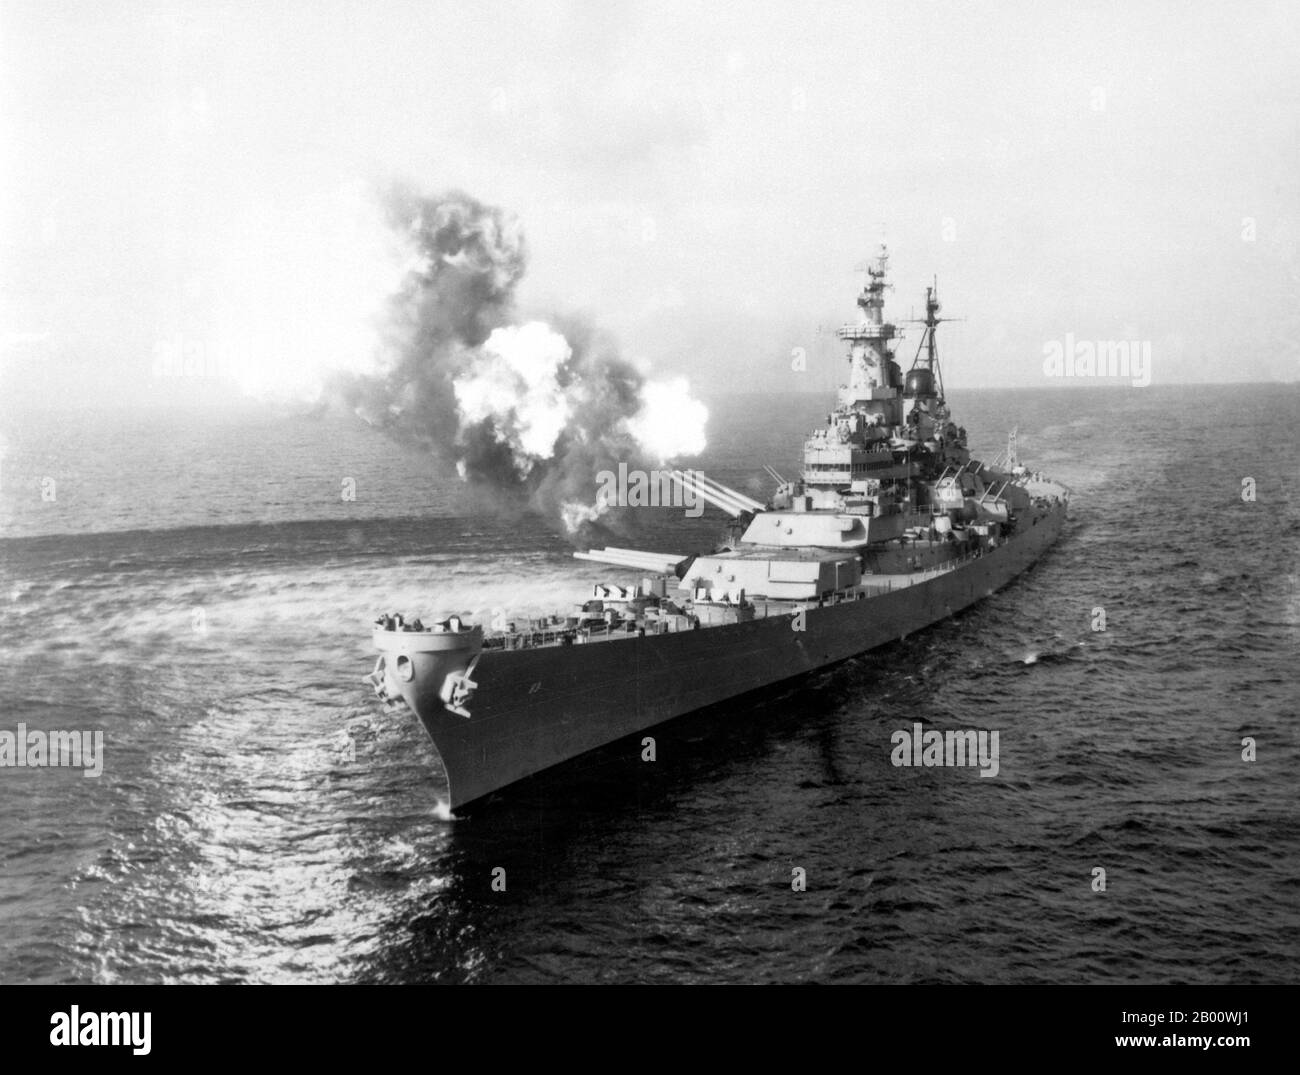 Korea: The USS Missouri fires a 16-inch salvo at Chong Jin, North Korea, Korean War (1950-1953), 26 December 1950.  The Korean War (25 June 1950 - armistice signed 27 July 1953) was a military conflict between the Republic of Korea, supported by the United Nations, and North Korea, supported by the People's Republic of China (PRC), with military material aid from the Soviet Union. The war was a result of the physical division of Korea by an agreement of the victorious Allies at the conclusion of the Pacific War at the end of World War II. Stock Photo